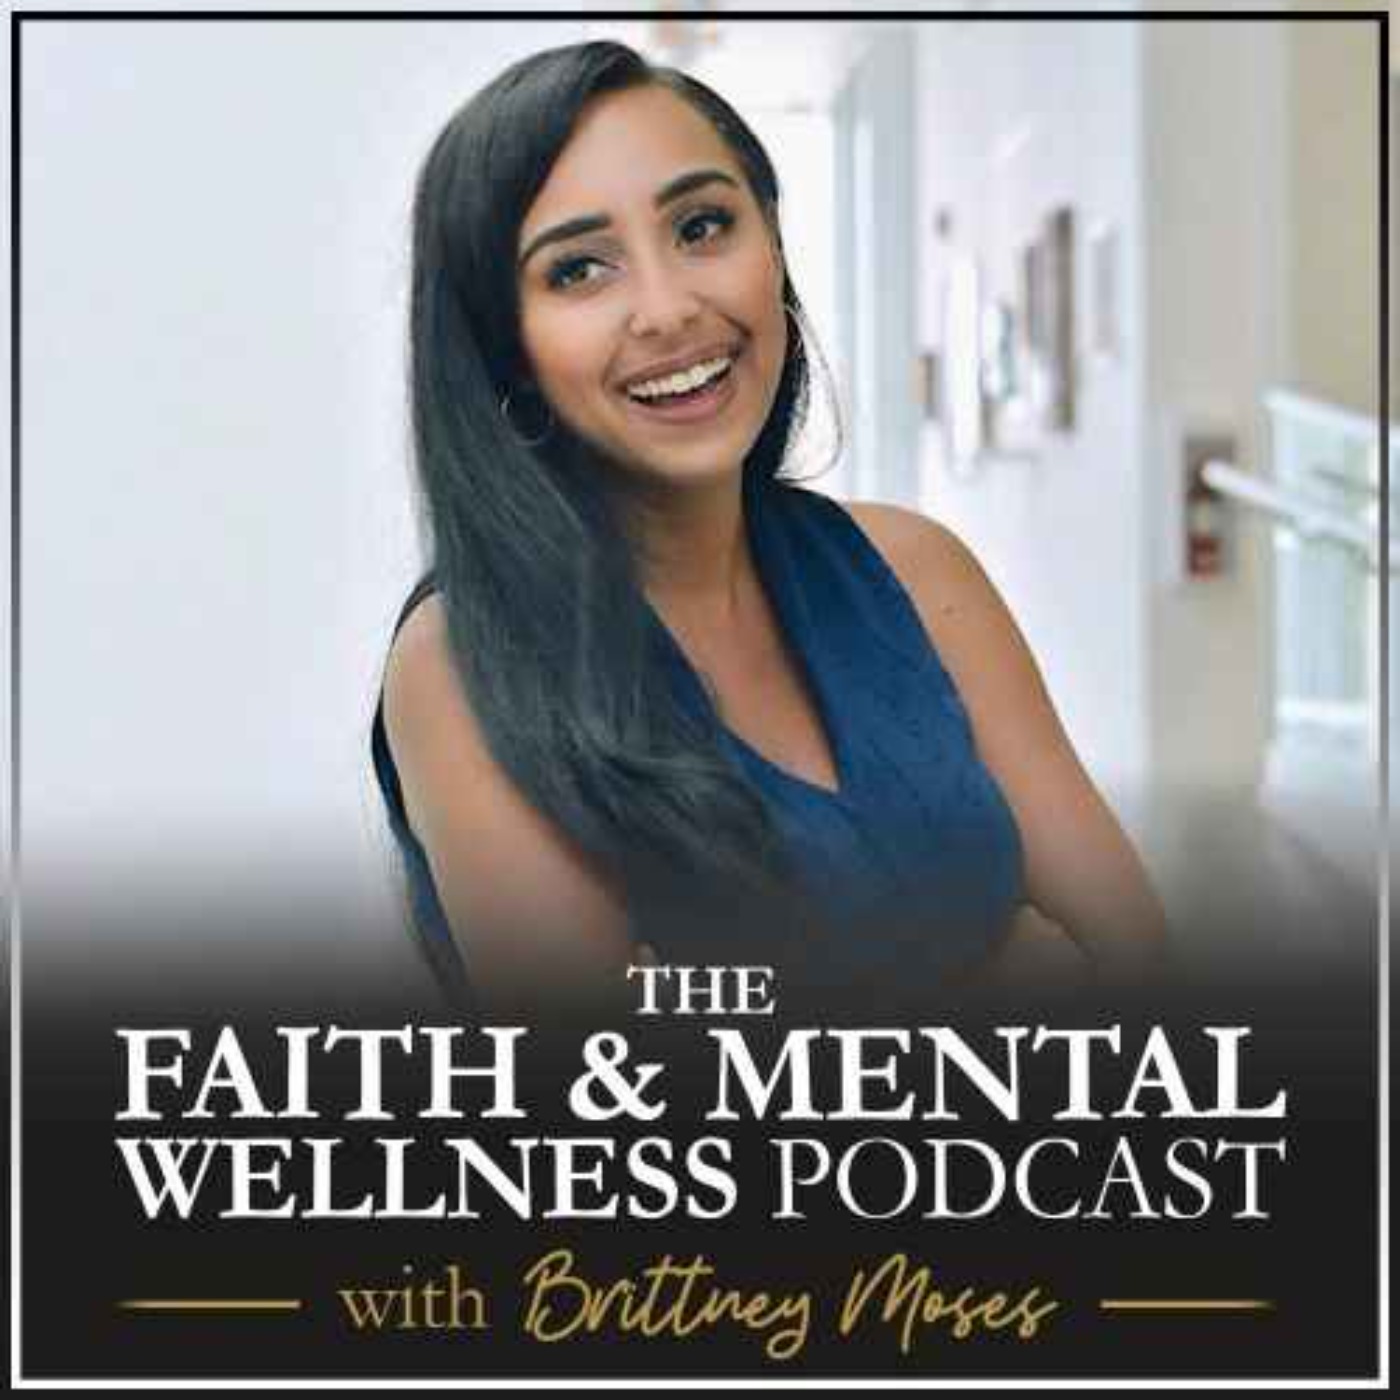 079: Understanding Bipolar Disorder from a Faith-based Perspective with Katie Dale